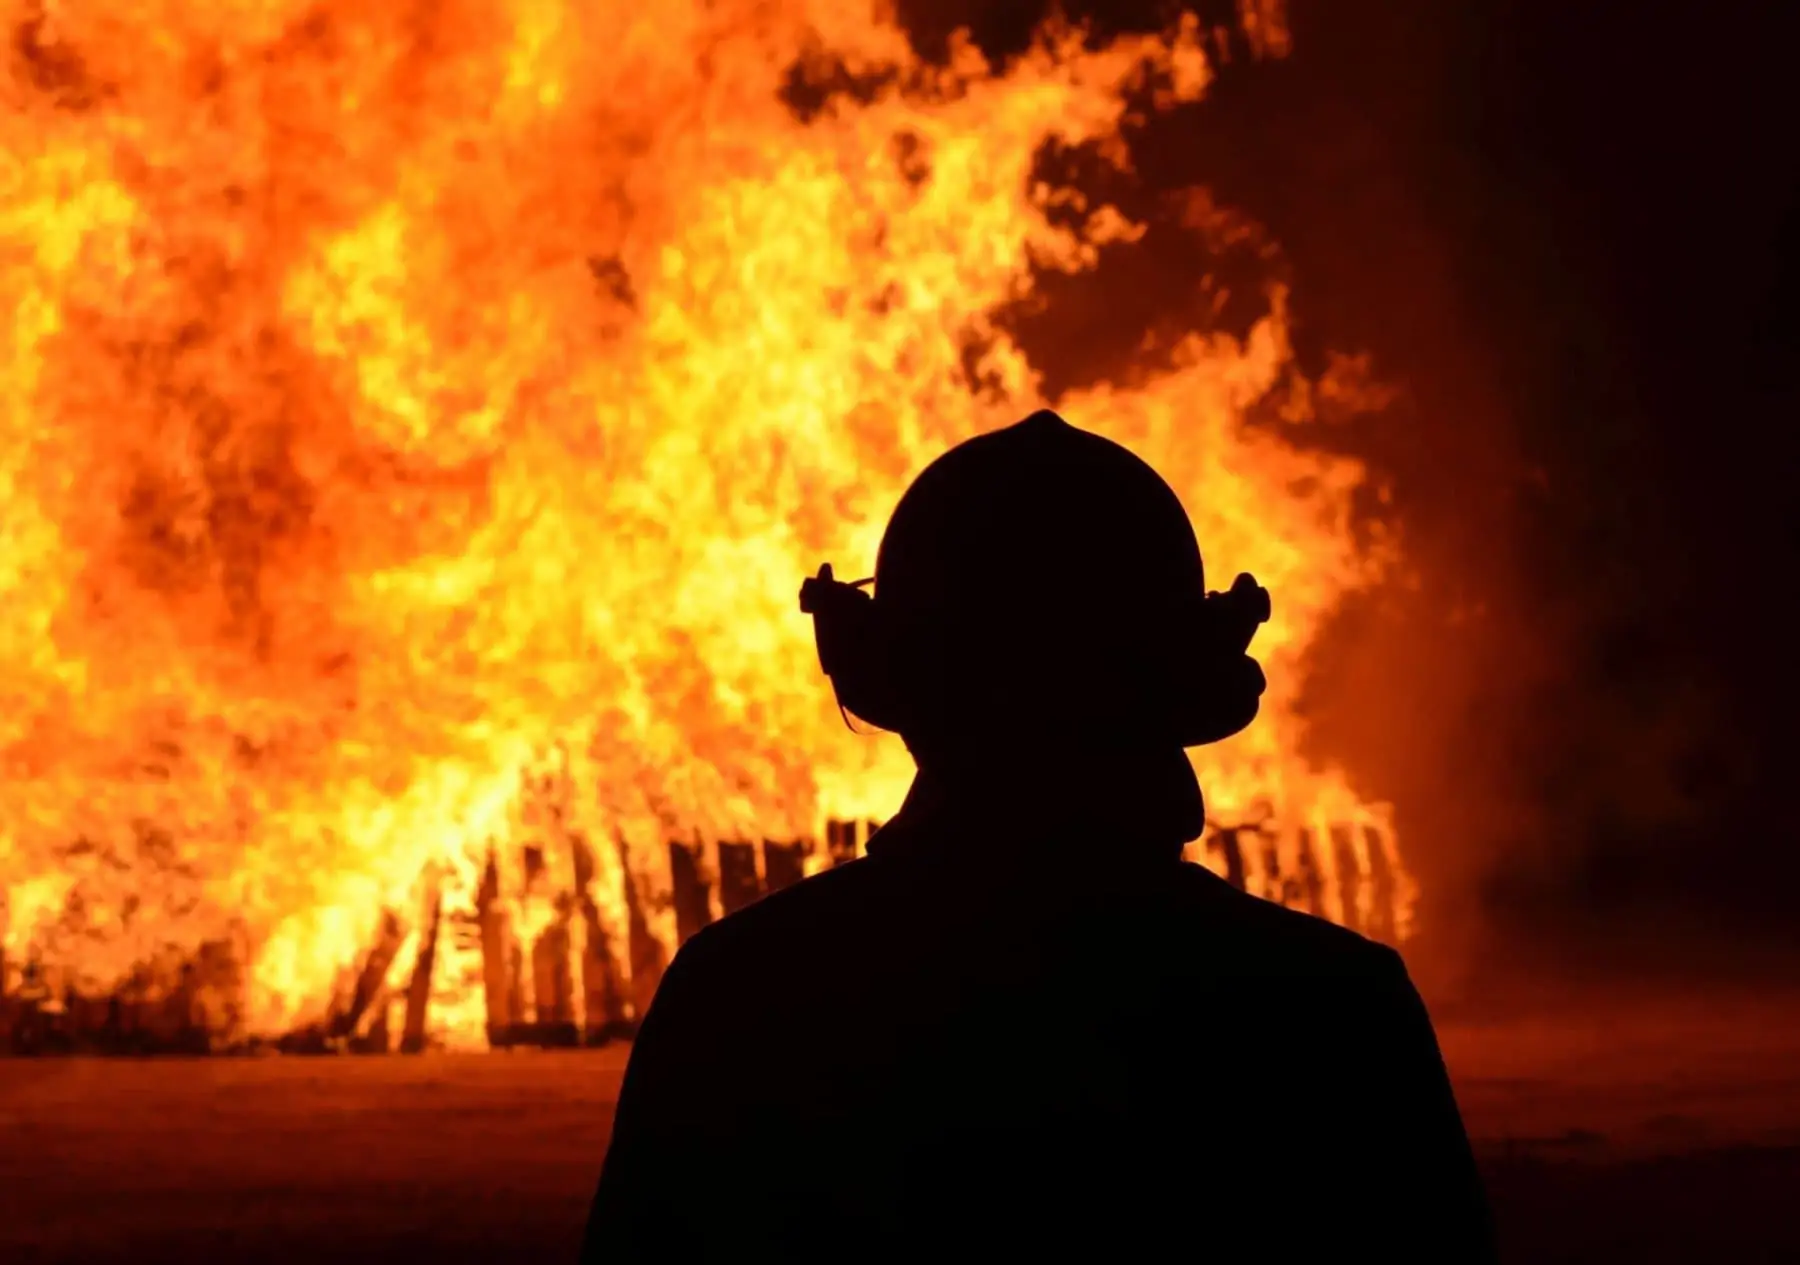 Silhouette of fireman watching huge flames in background